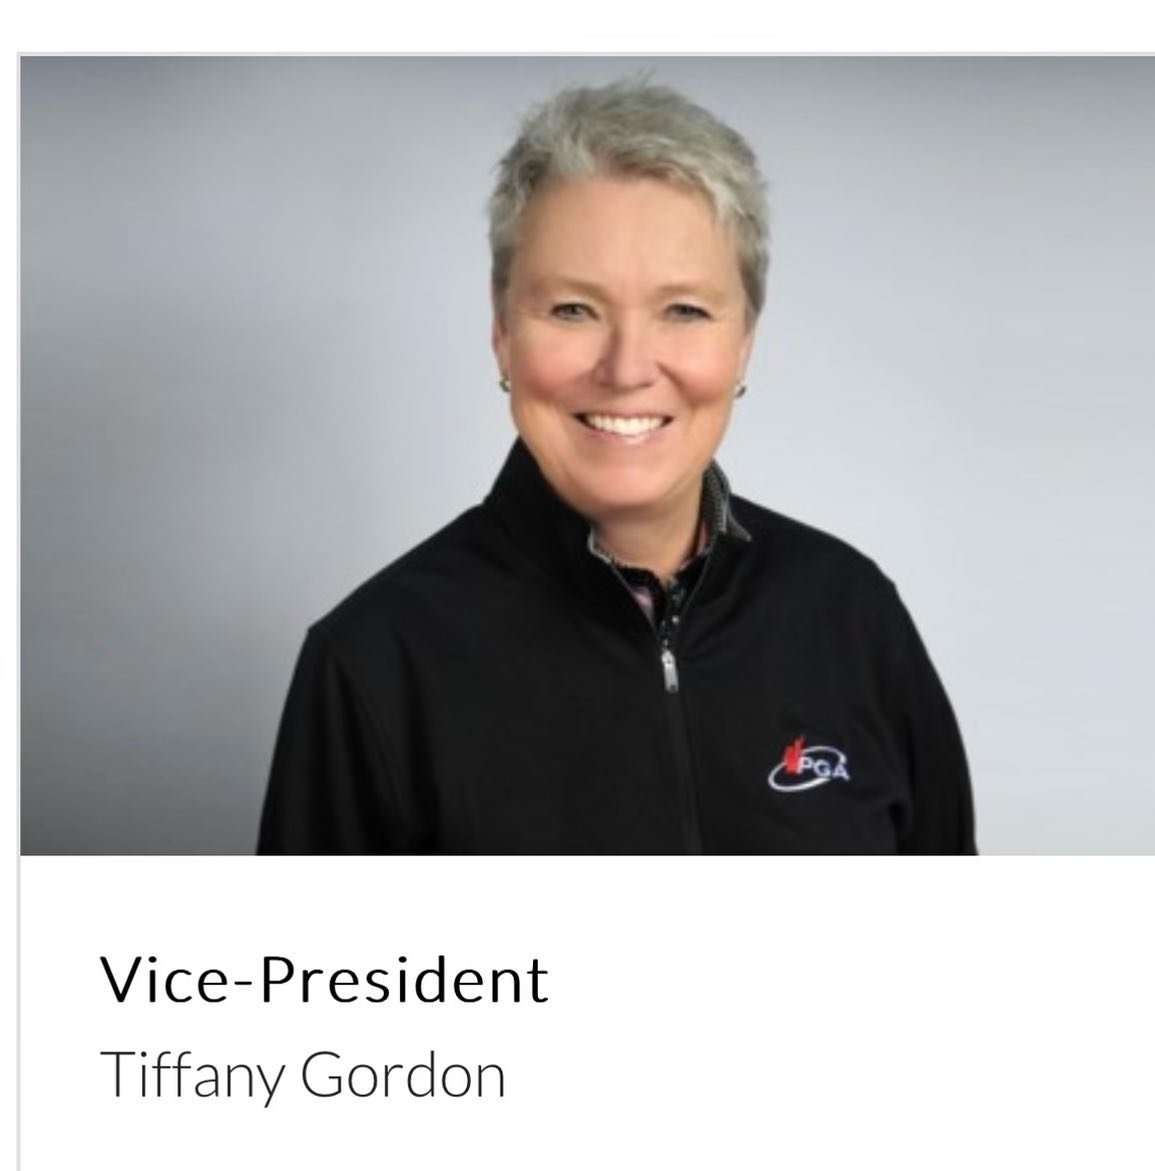 Carnmoney Golf Club is very proud to announce, our own Tiffany Gordon is now the first female Vice President of the PGA of Canada. Congratulations Tiff!  @tiffgordon10 @pgaofcanada